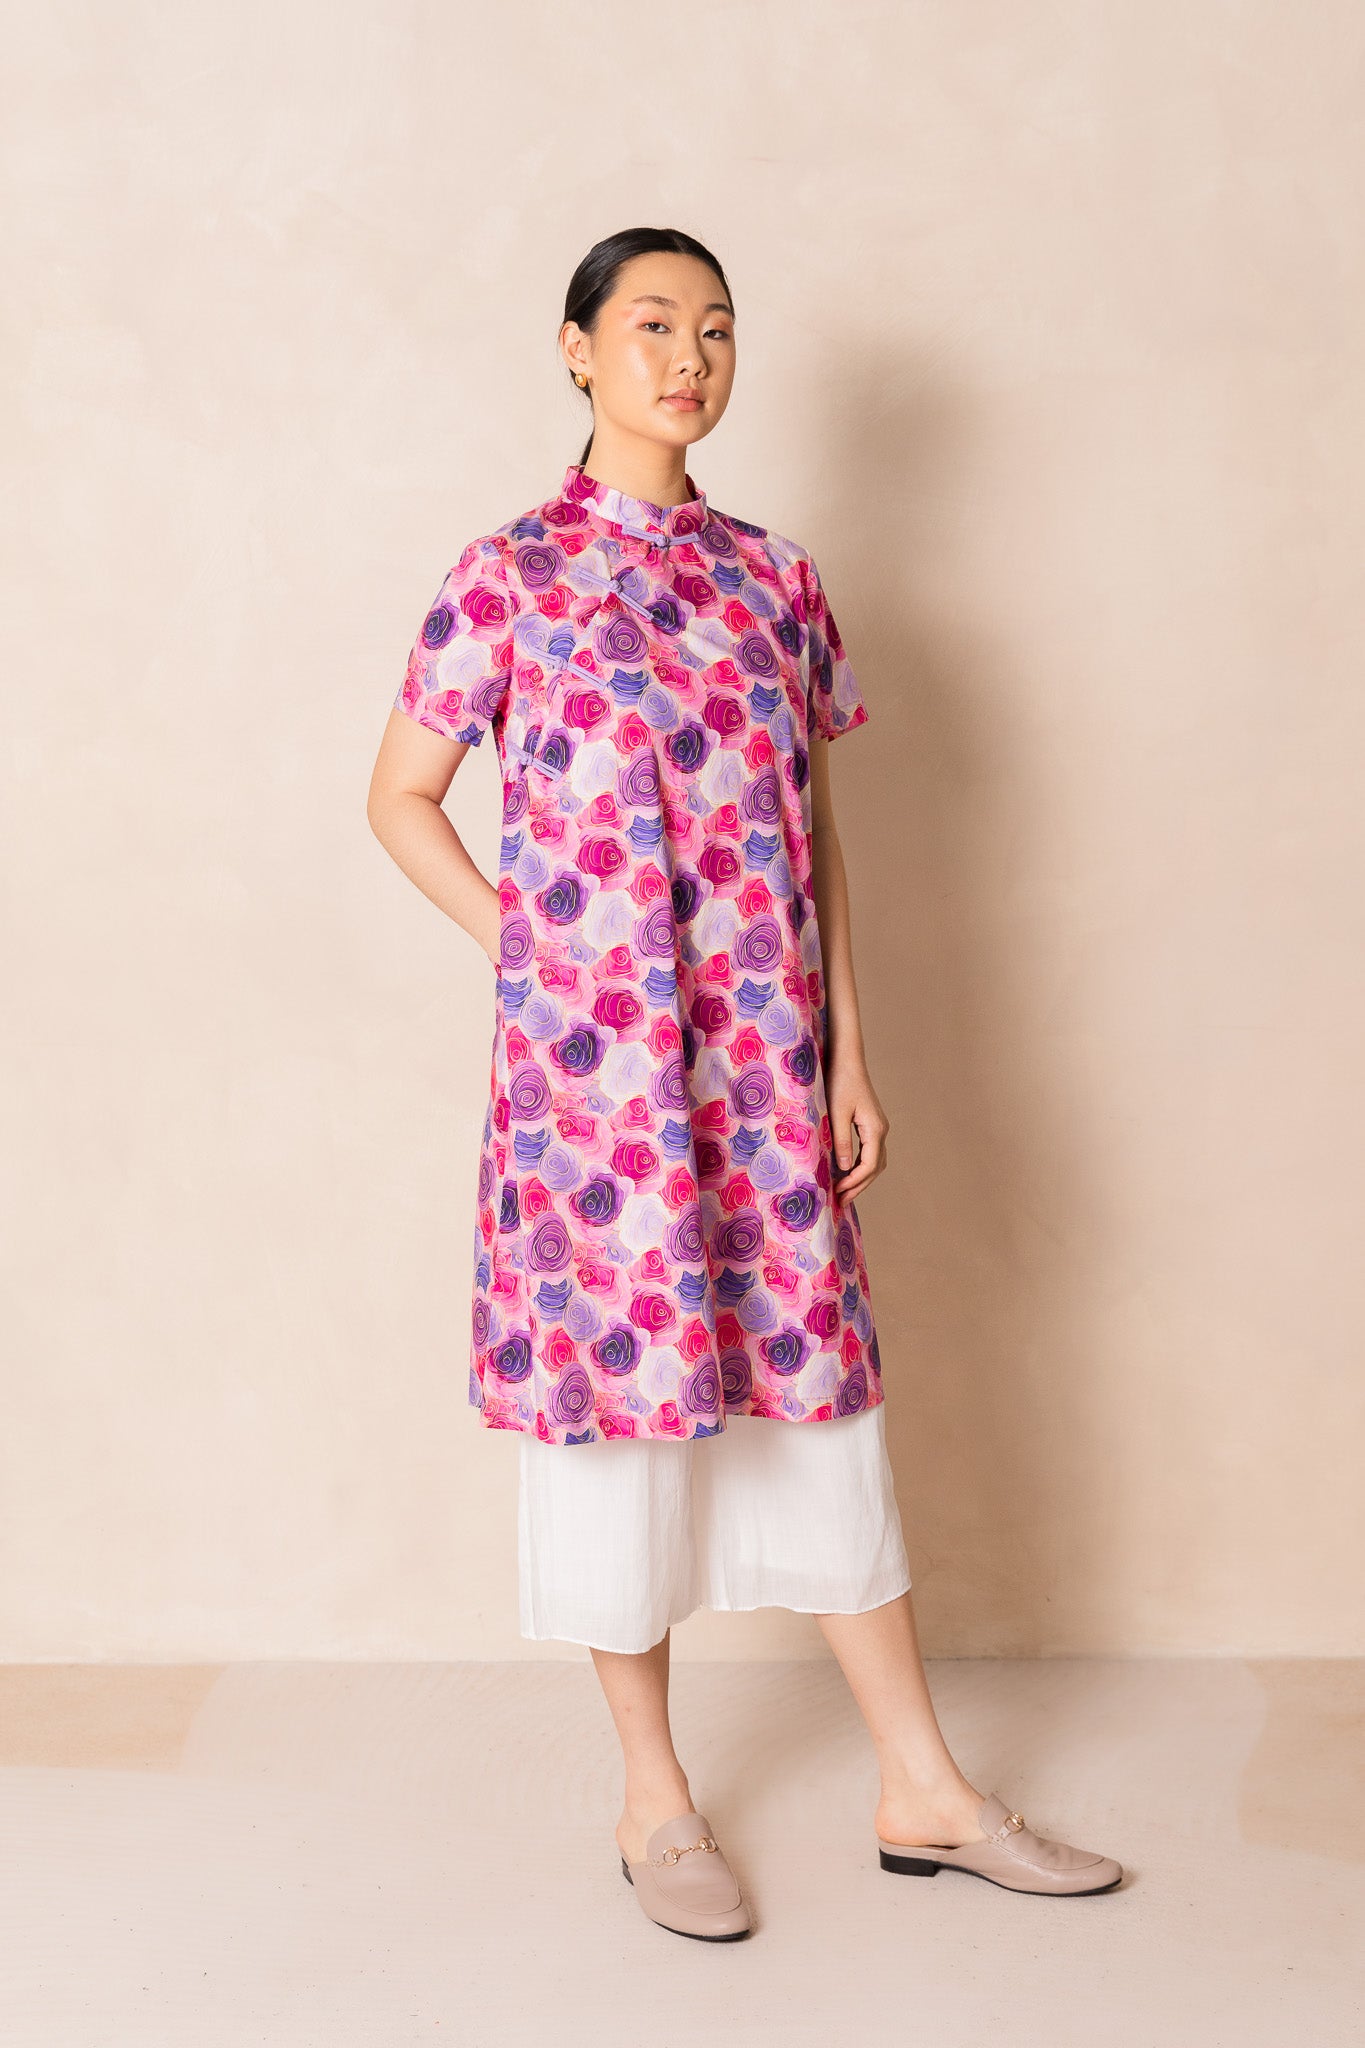 Water Colour Pink Rose Print Short Sleeve Cheongsam Midi Dress, available on You Living